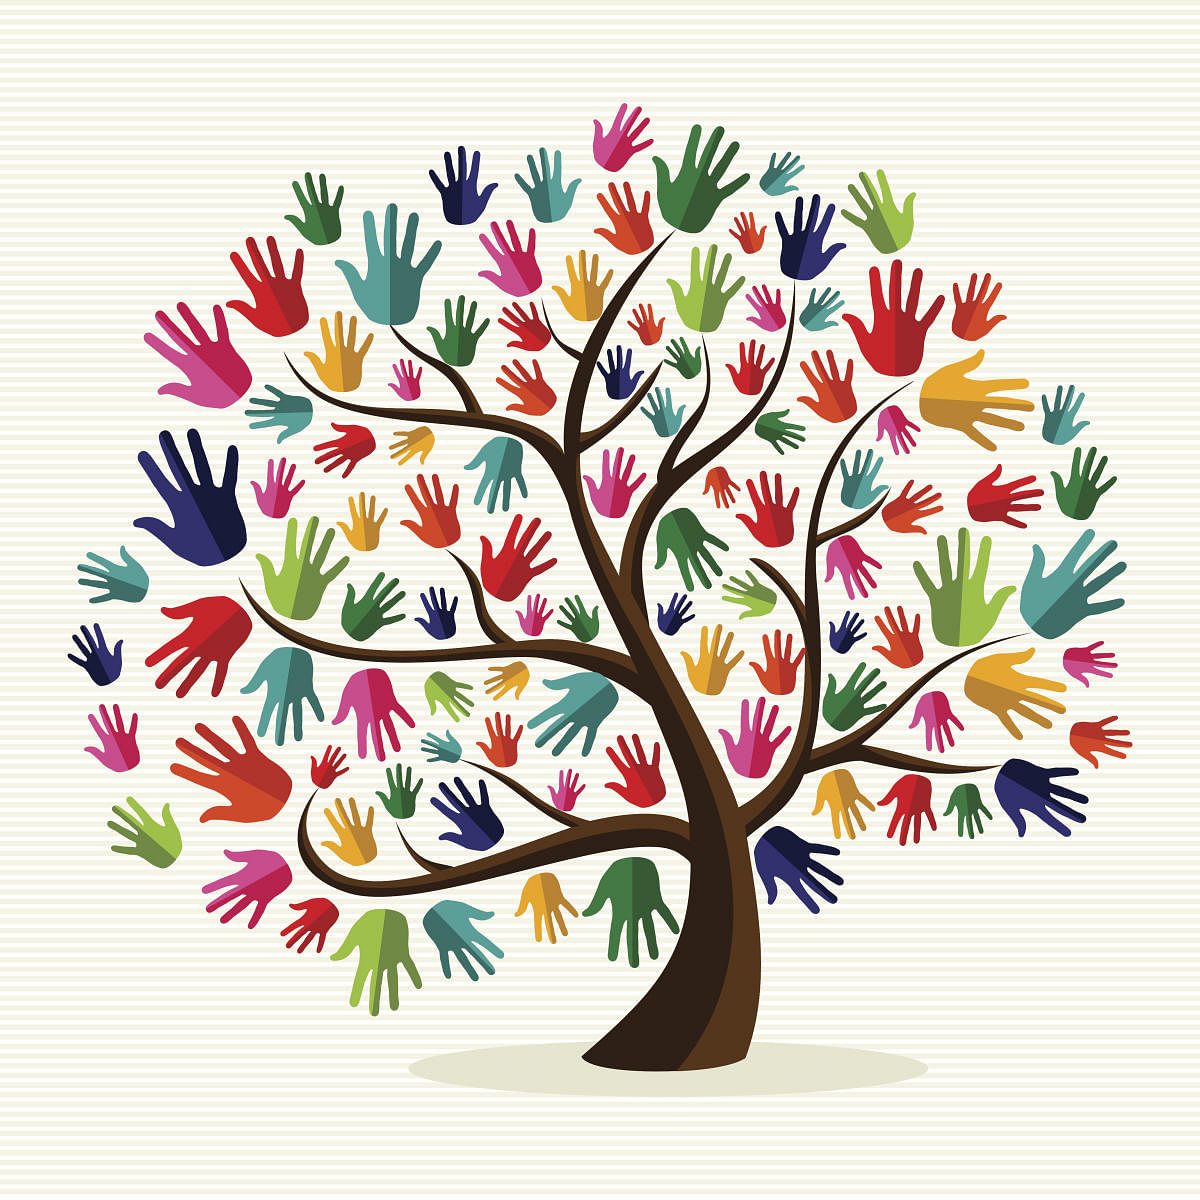 Diversity tree hands illustration background. Vector file layered for easy manipulation and custom coloring.Diversity_Tree_Hands_Illustration